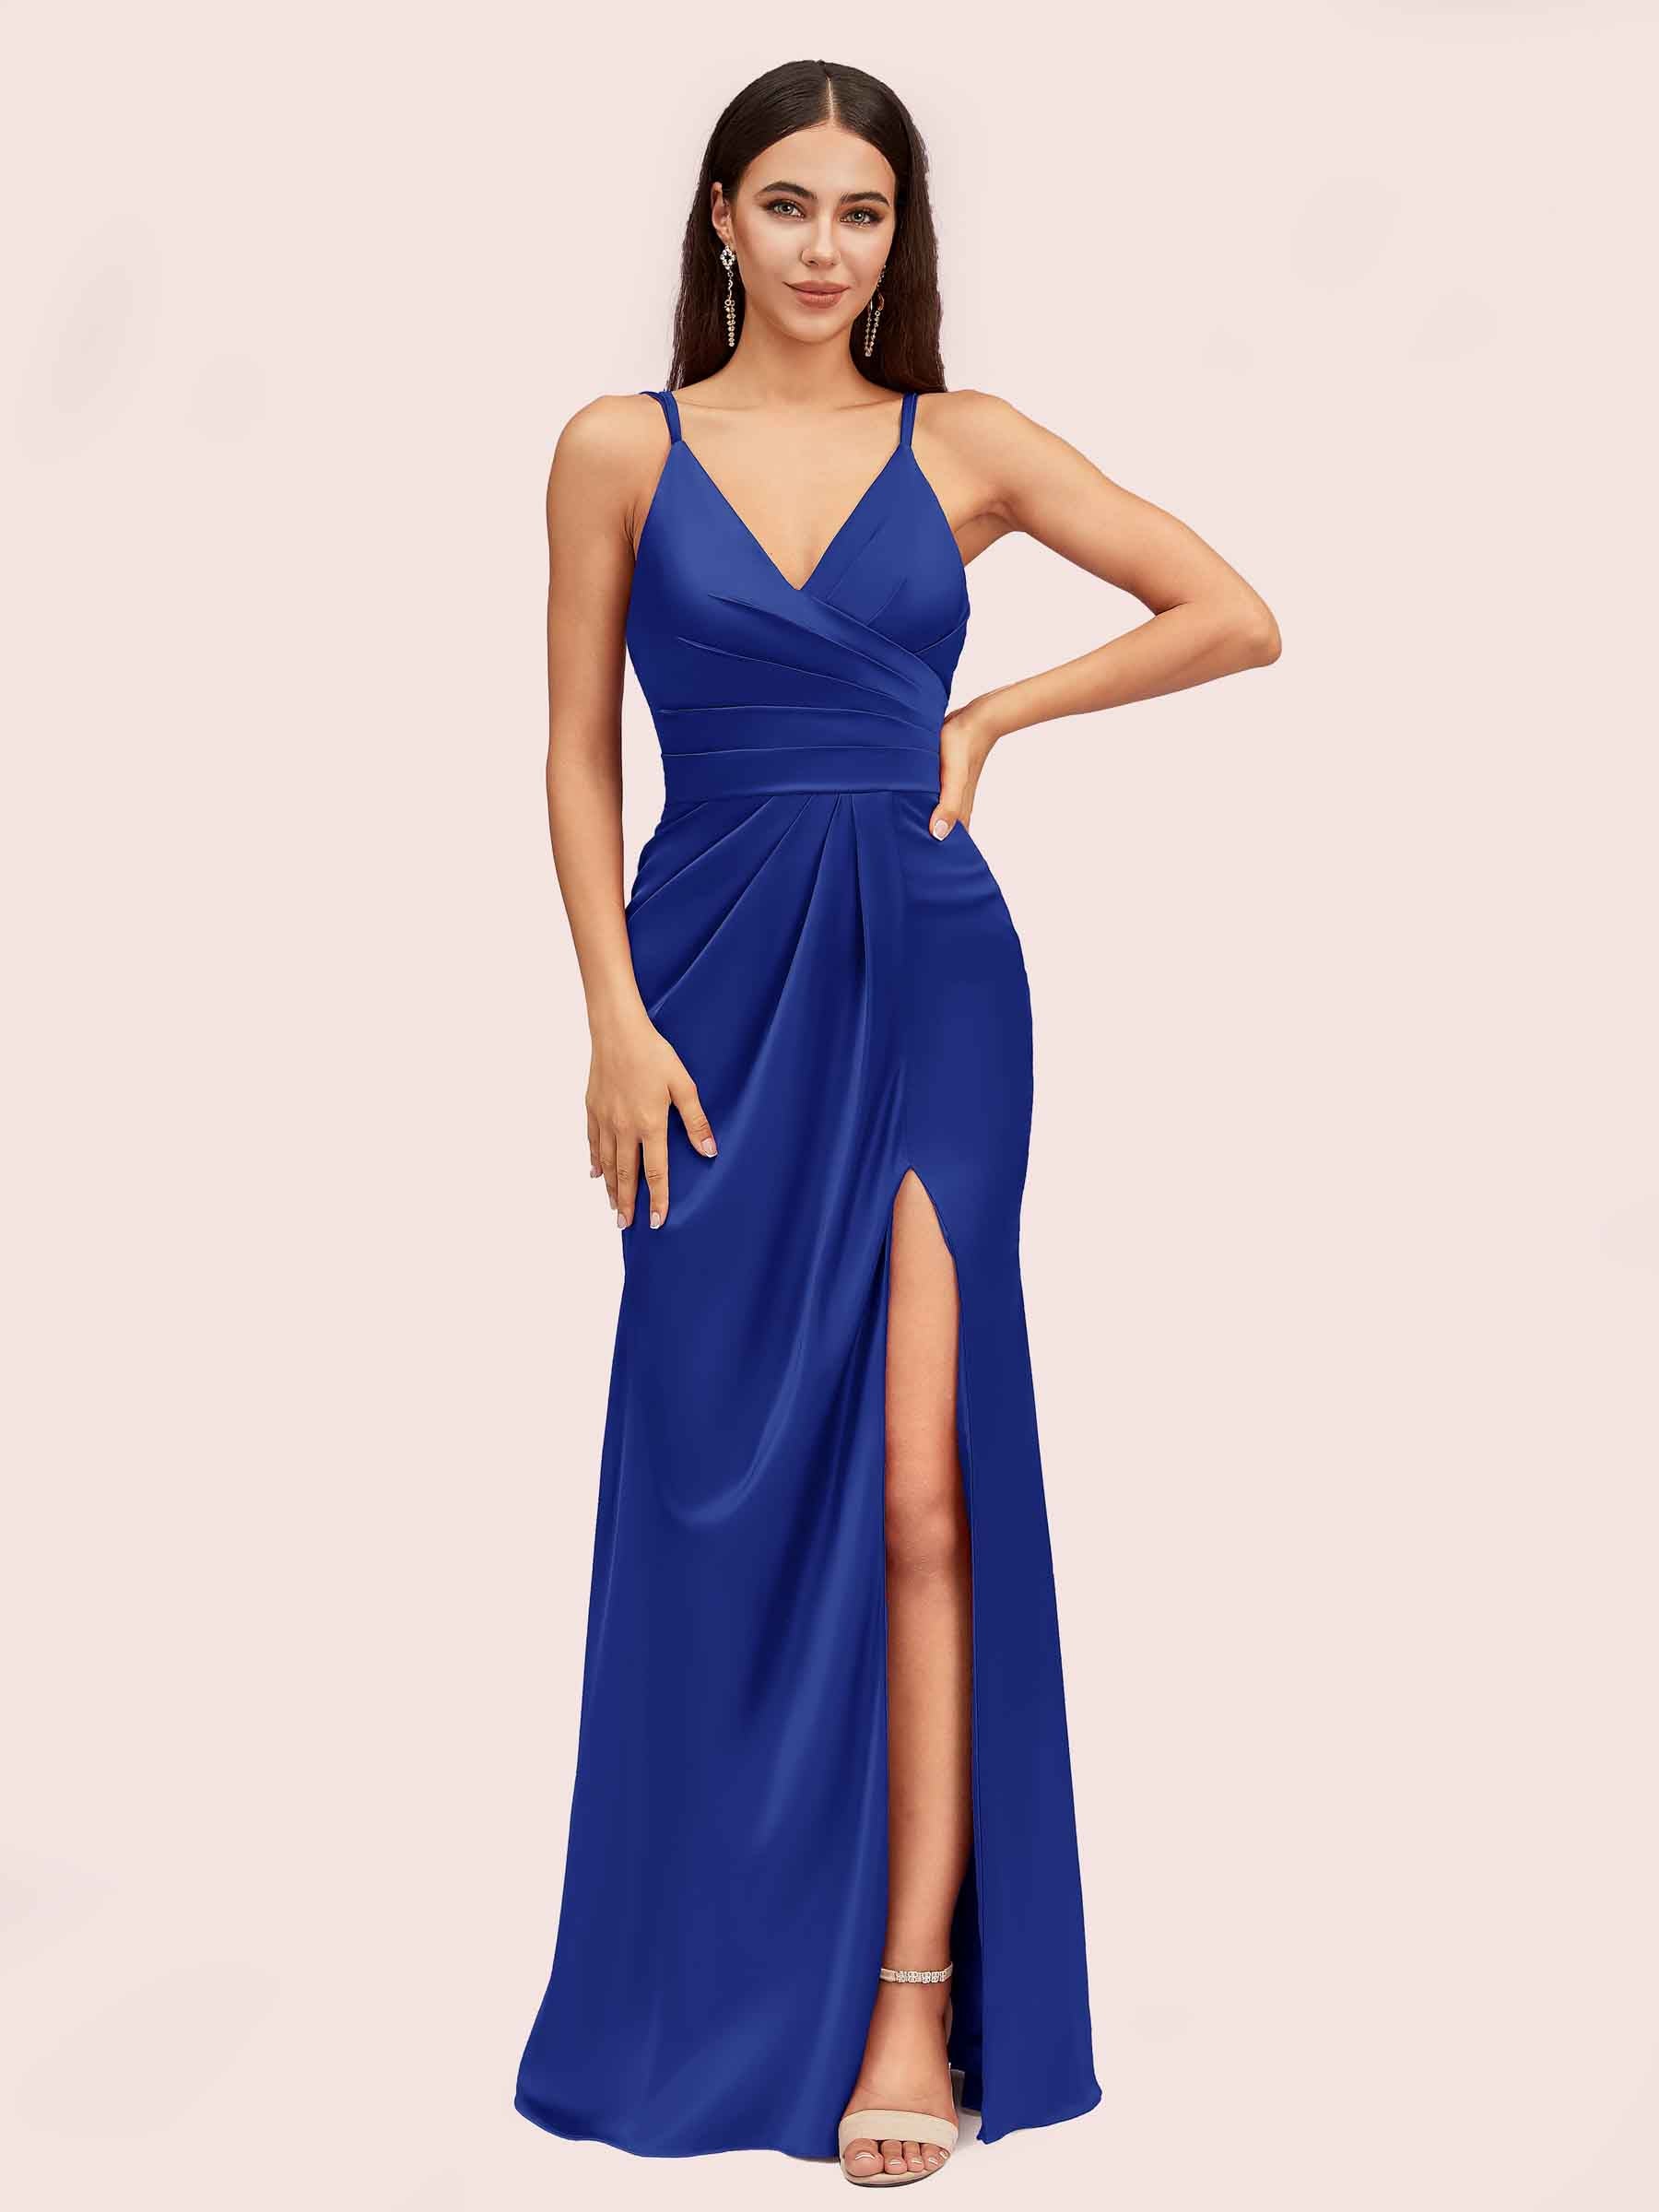 Royal Blue Satin Bridesmaid Dresses Of All Size | Cetims